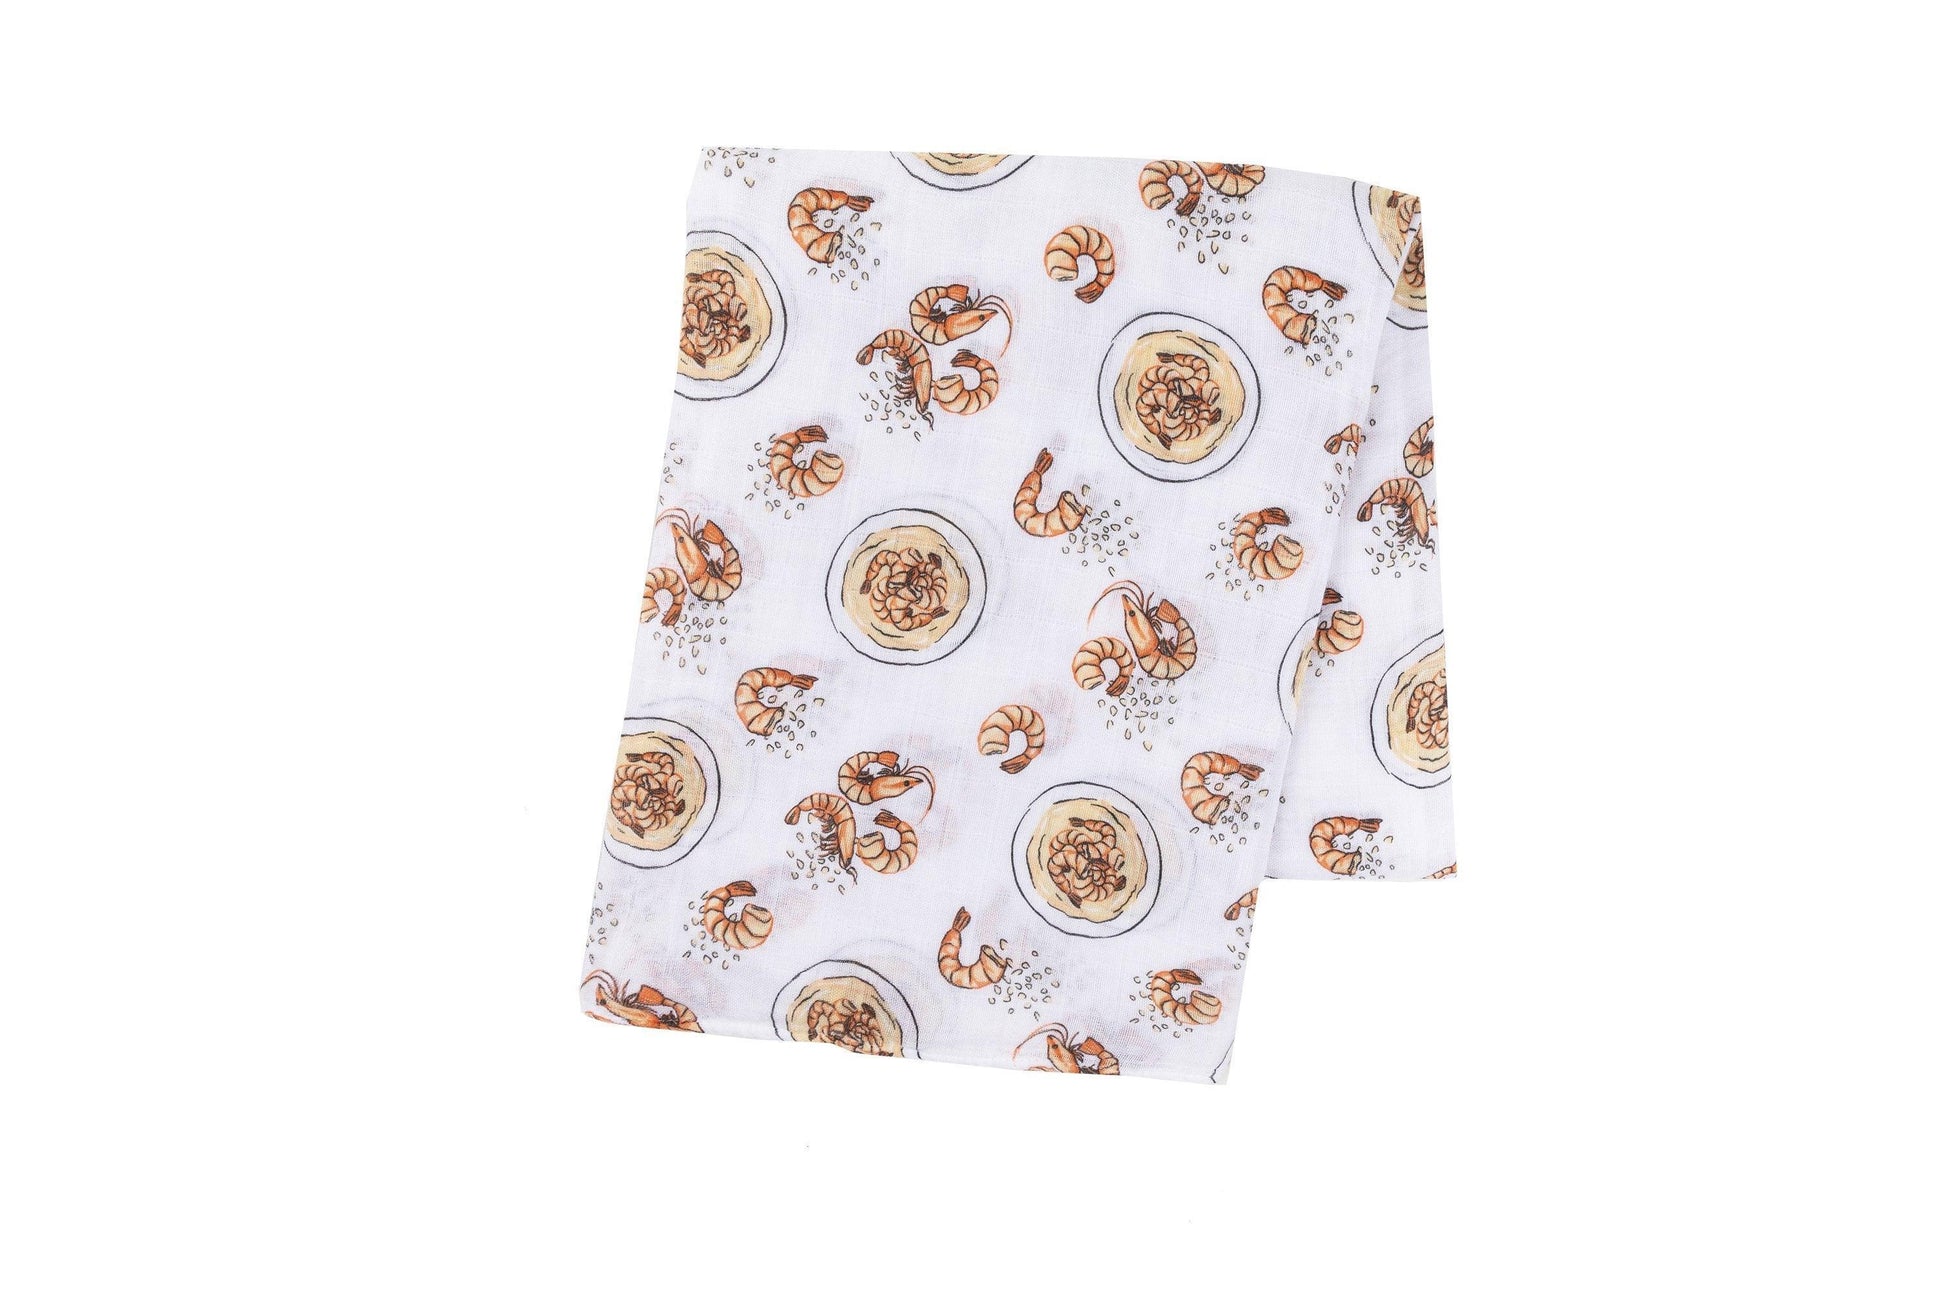 Soft muslin baby swaddle blanket with playful shrimp and grits pattern, featuring pastel colors and whimsical design.